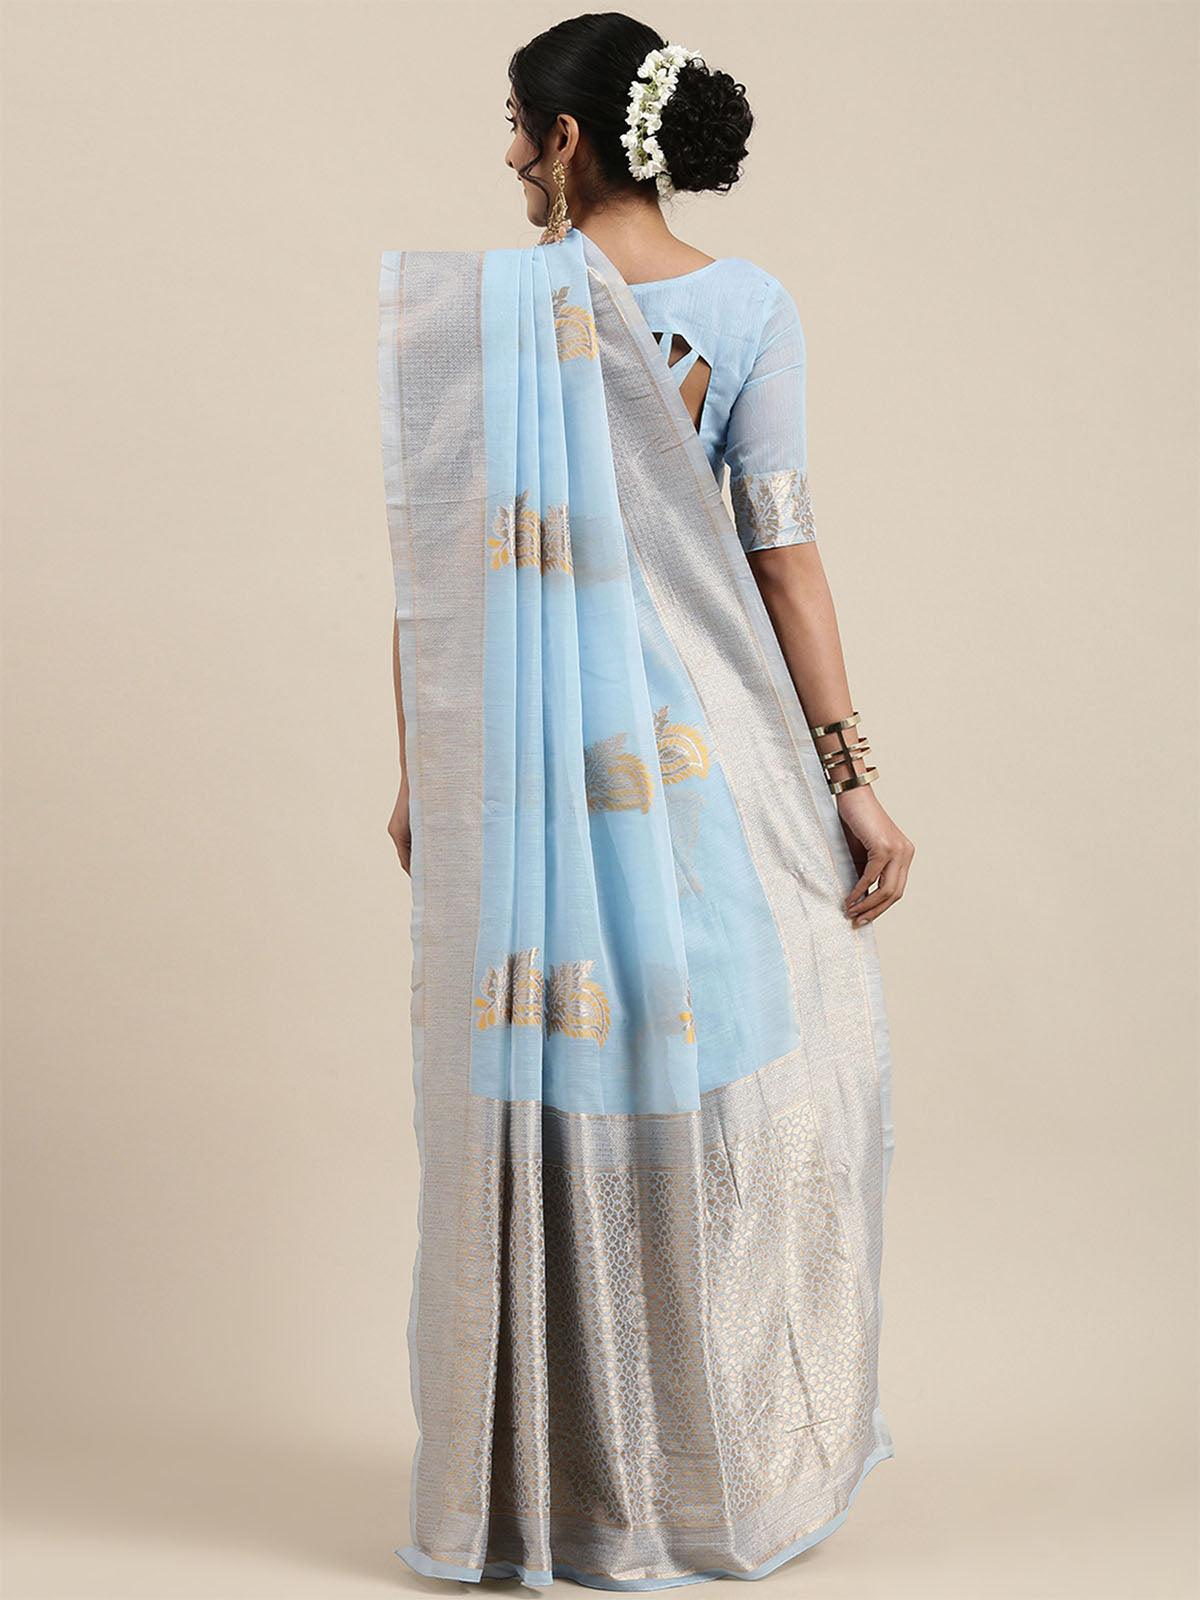 Women's Linen Turquoise Woven Design Woven saree With Blouse Piece - Odette